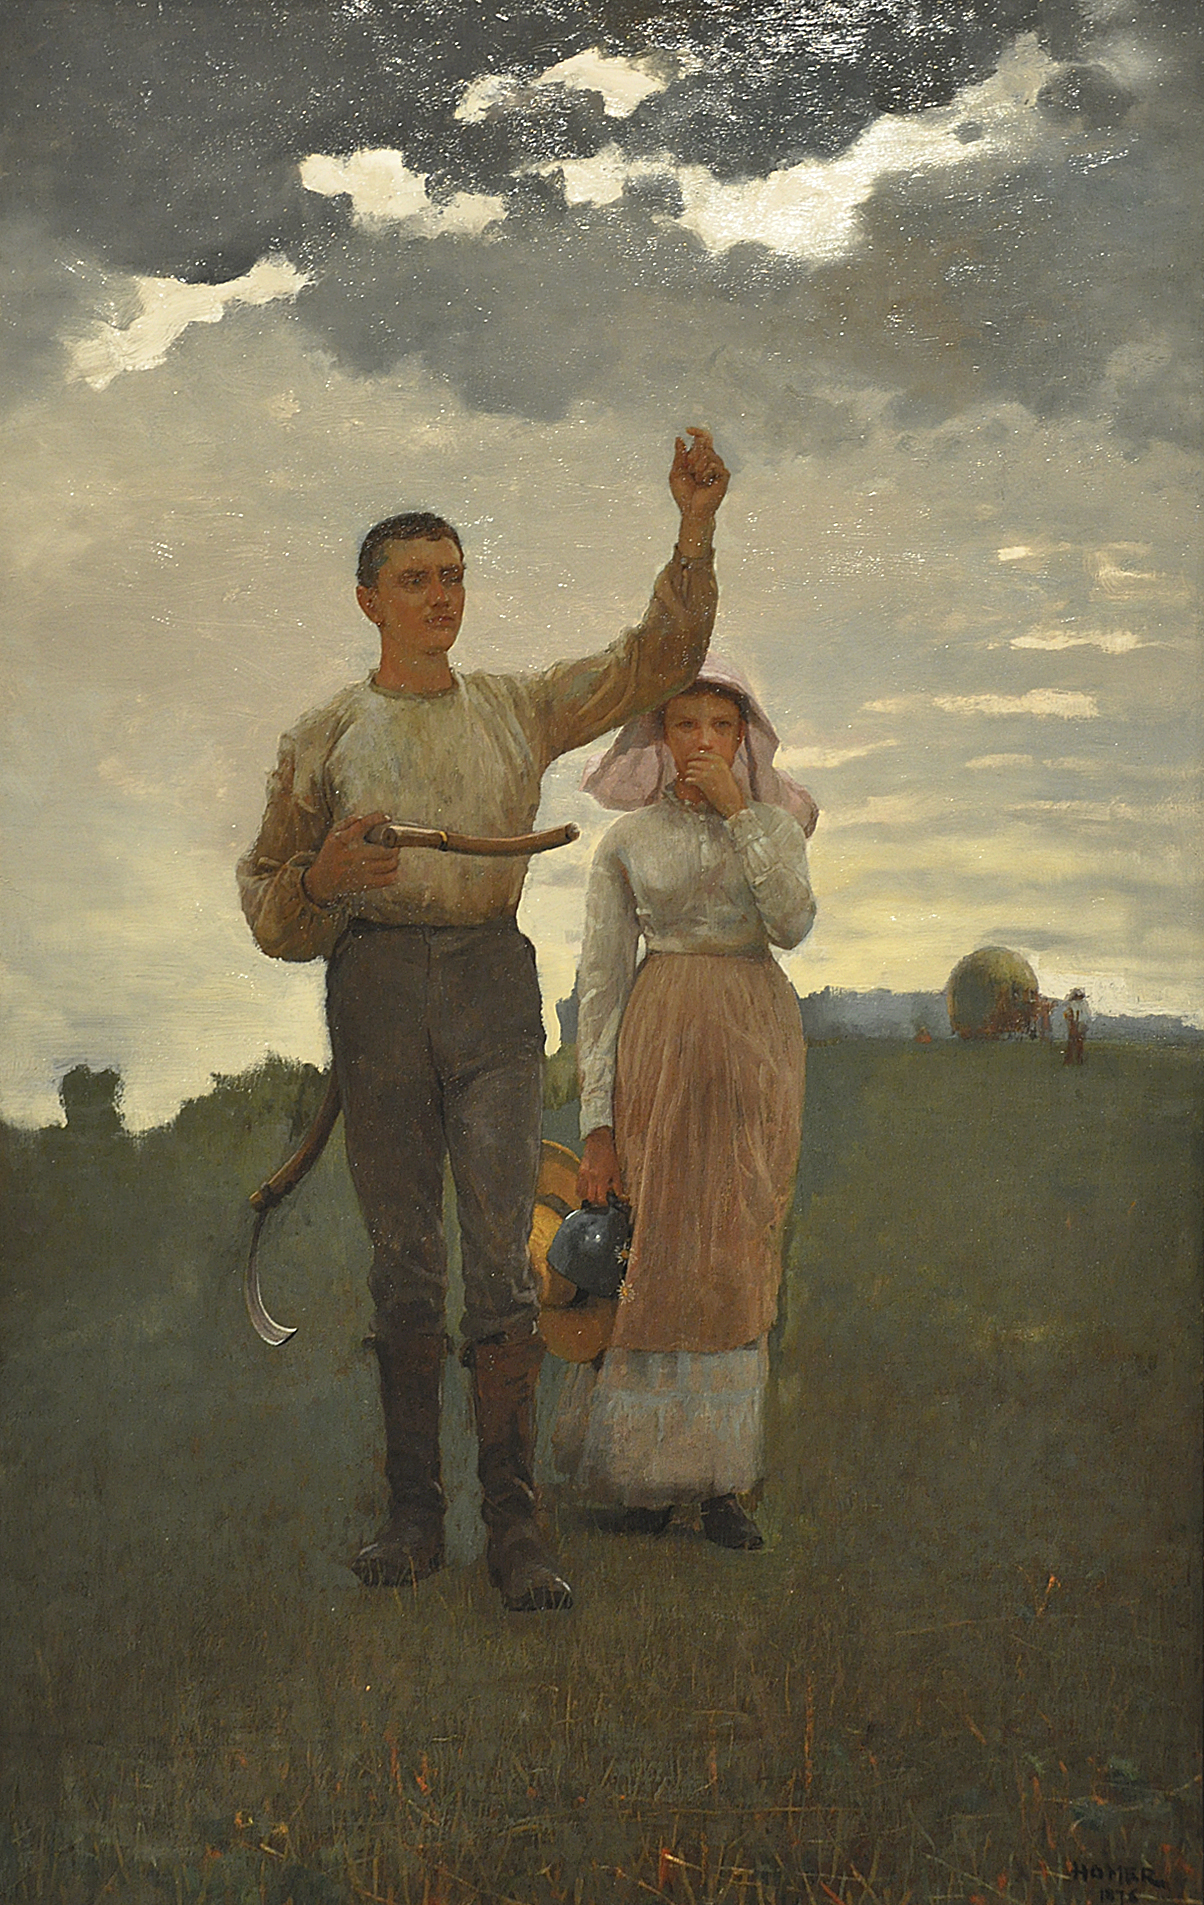 Answering The Horn by Winslow Homer, 1876